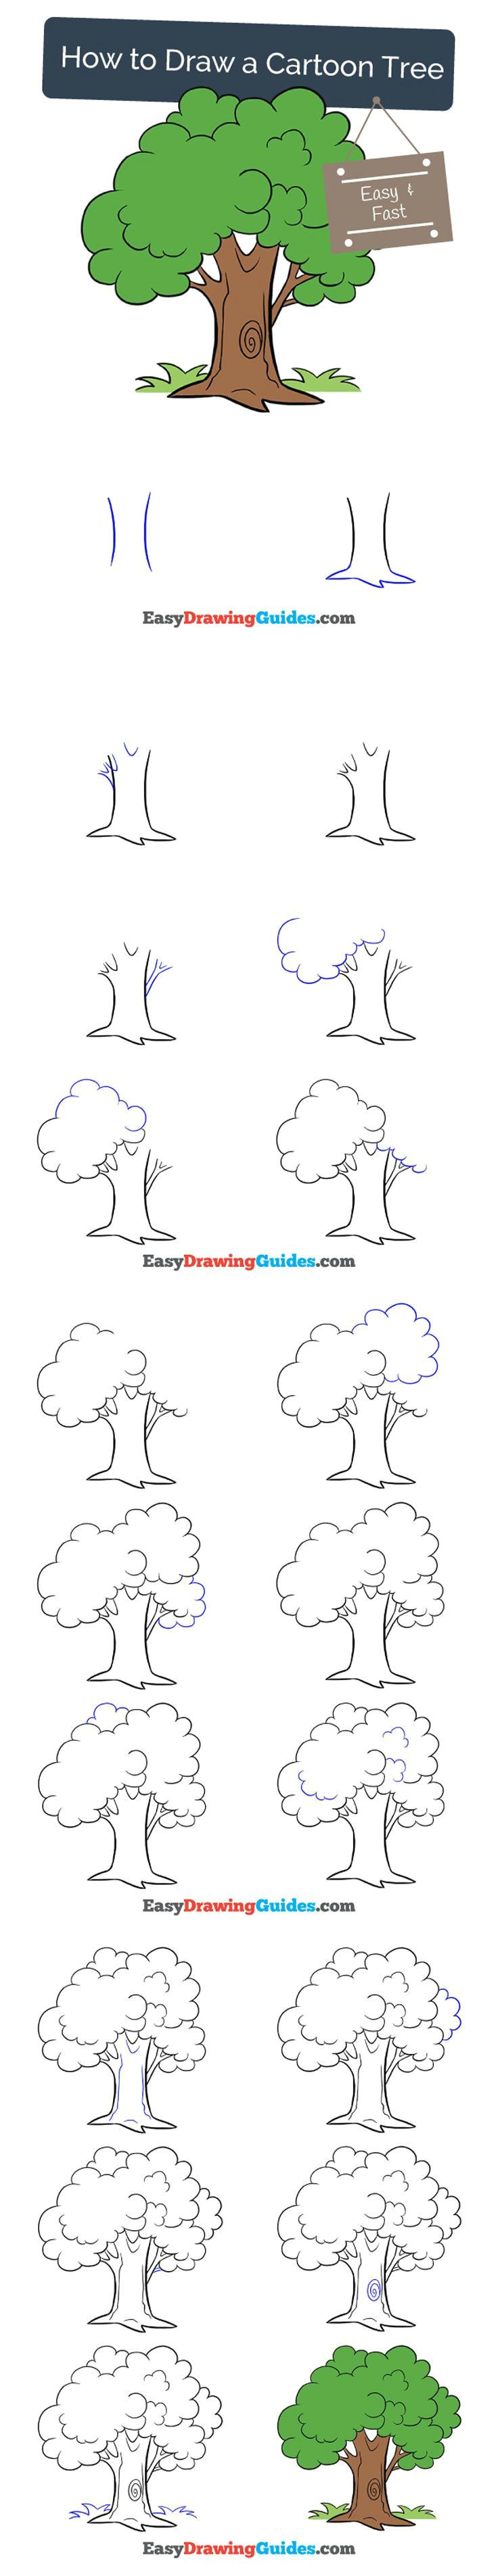 how to draw a cartoon tree easy drawing tutorials ideas by easy drawing guides pinterest drawings drawing tutorials for kids and step by step